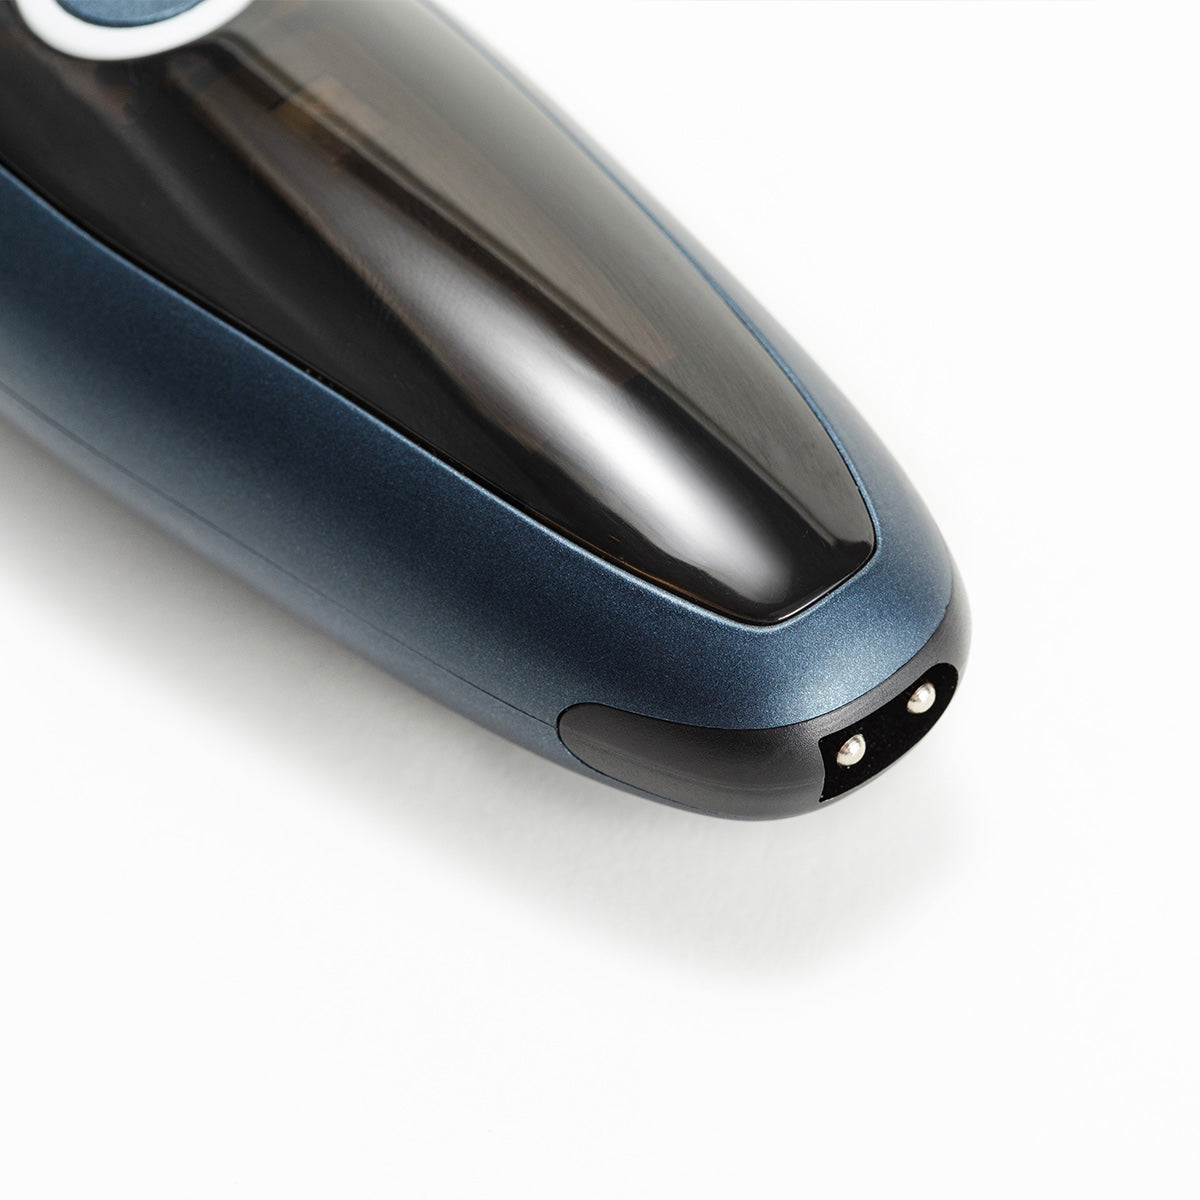 Charging Port of This Pet Hair Trimmer is Found at the Bottom Tip